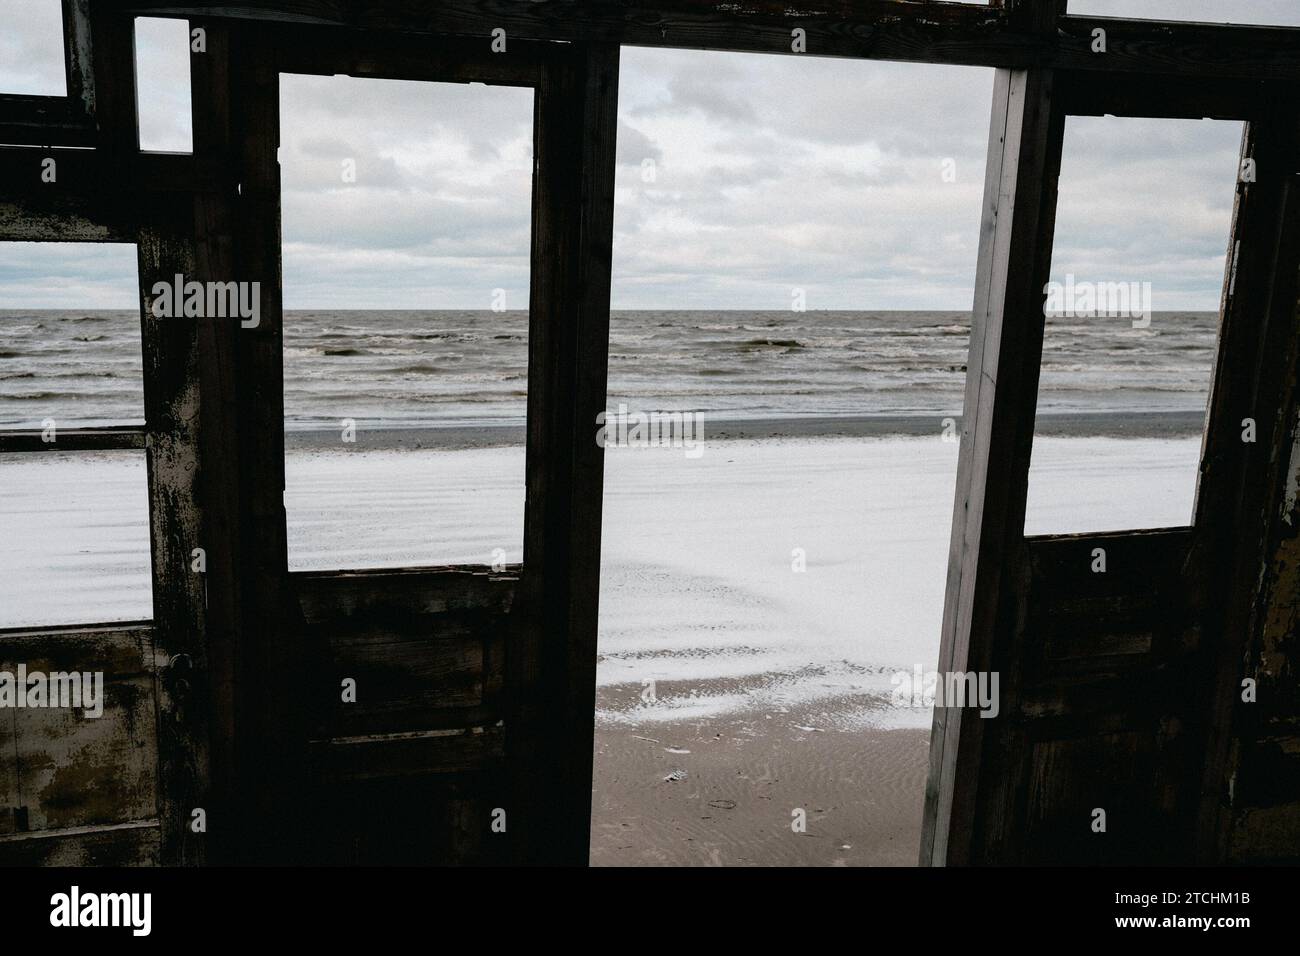 A stunning seascape view of Liepaja, Latvia through a rustic window frame. Stock Photo